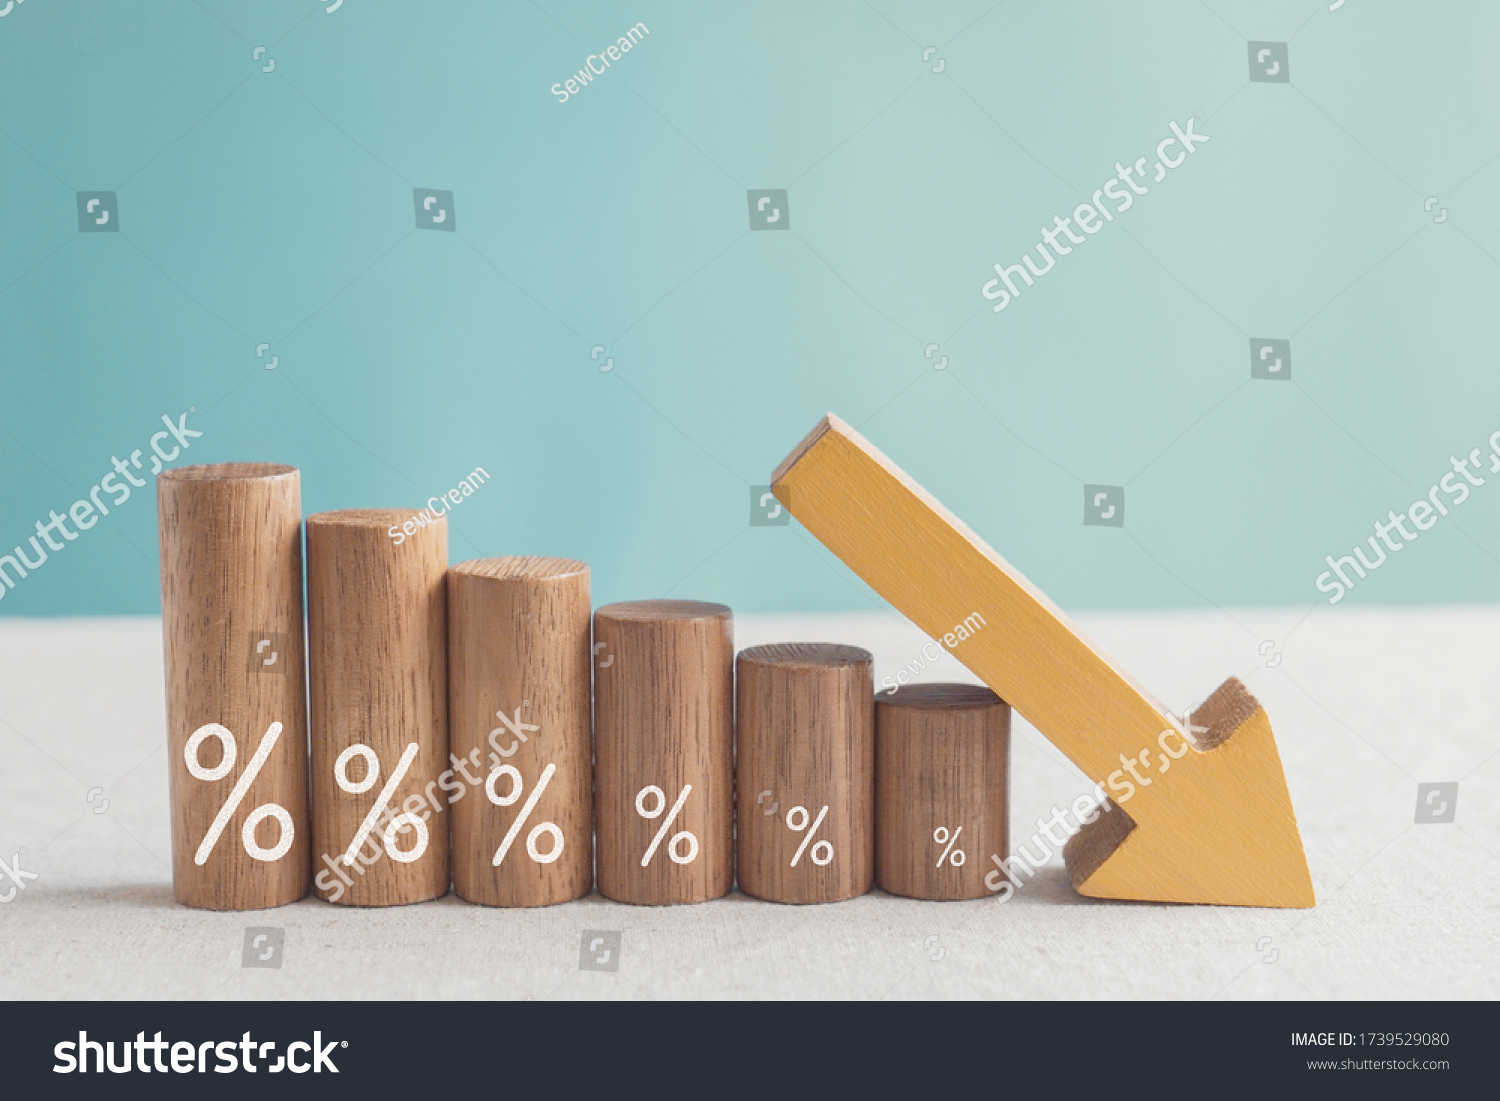 Wooden blocks with percentage sign and down arrow, investment reduce, financial recession crisis, interest rate decline, risk management concept #1739529080